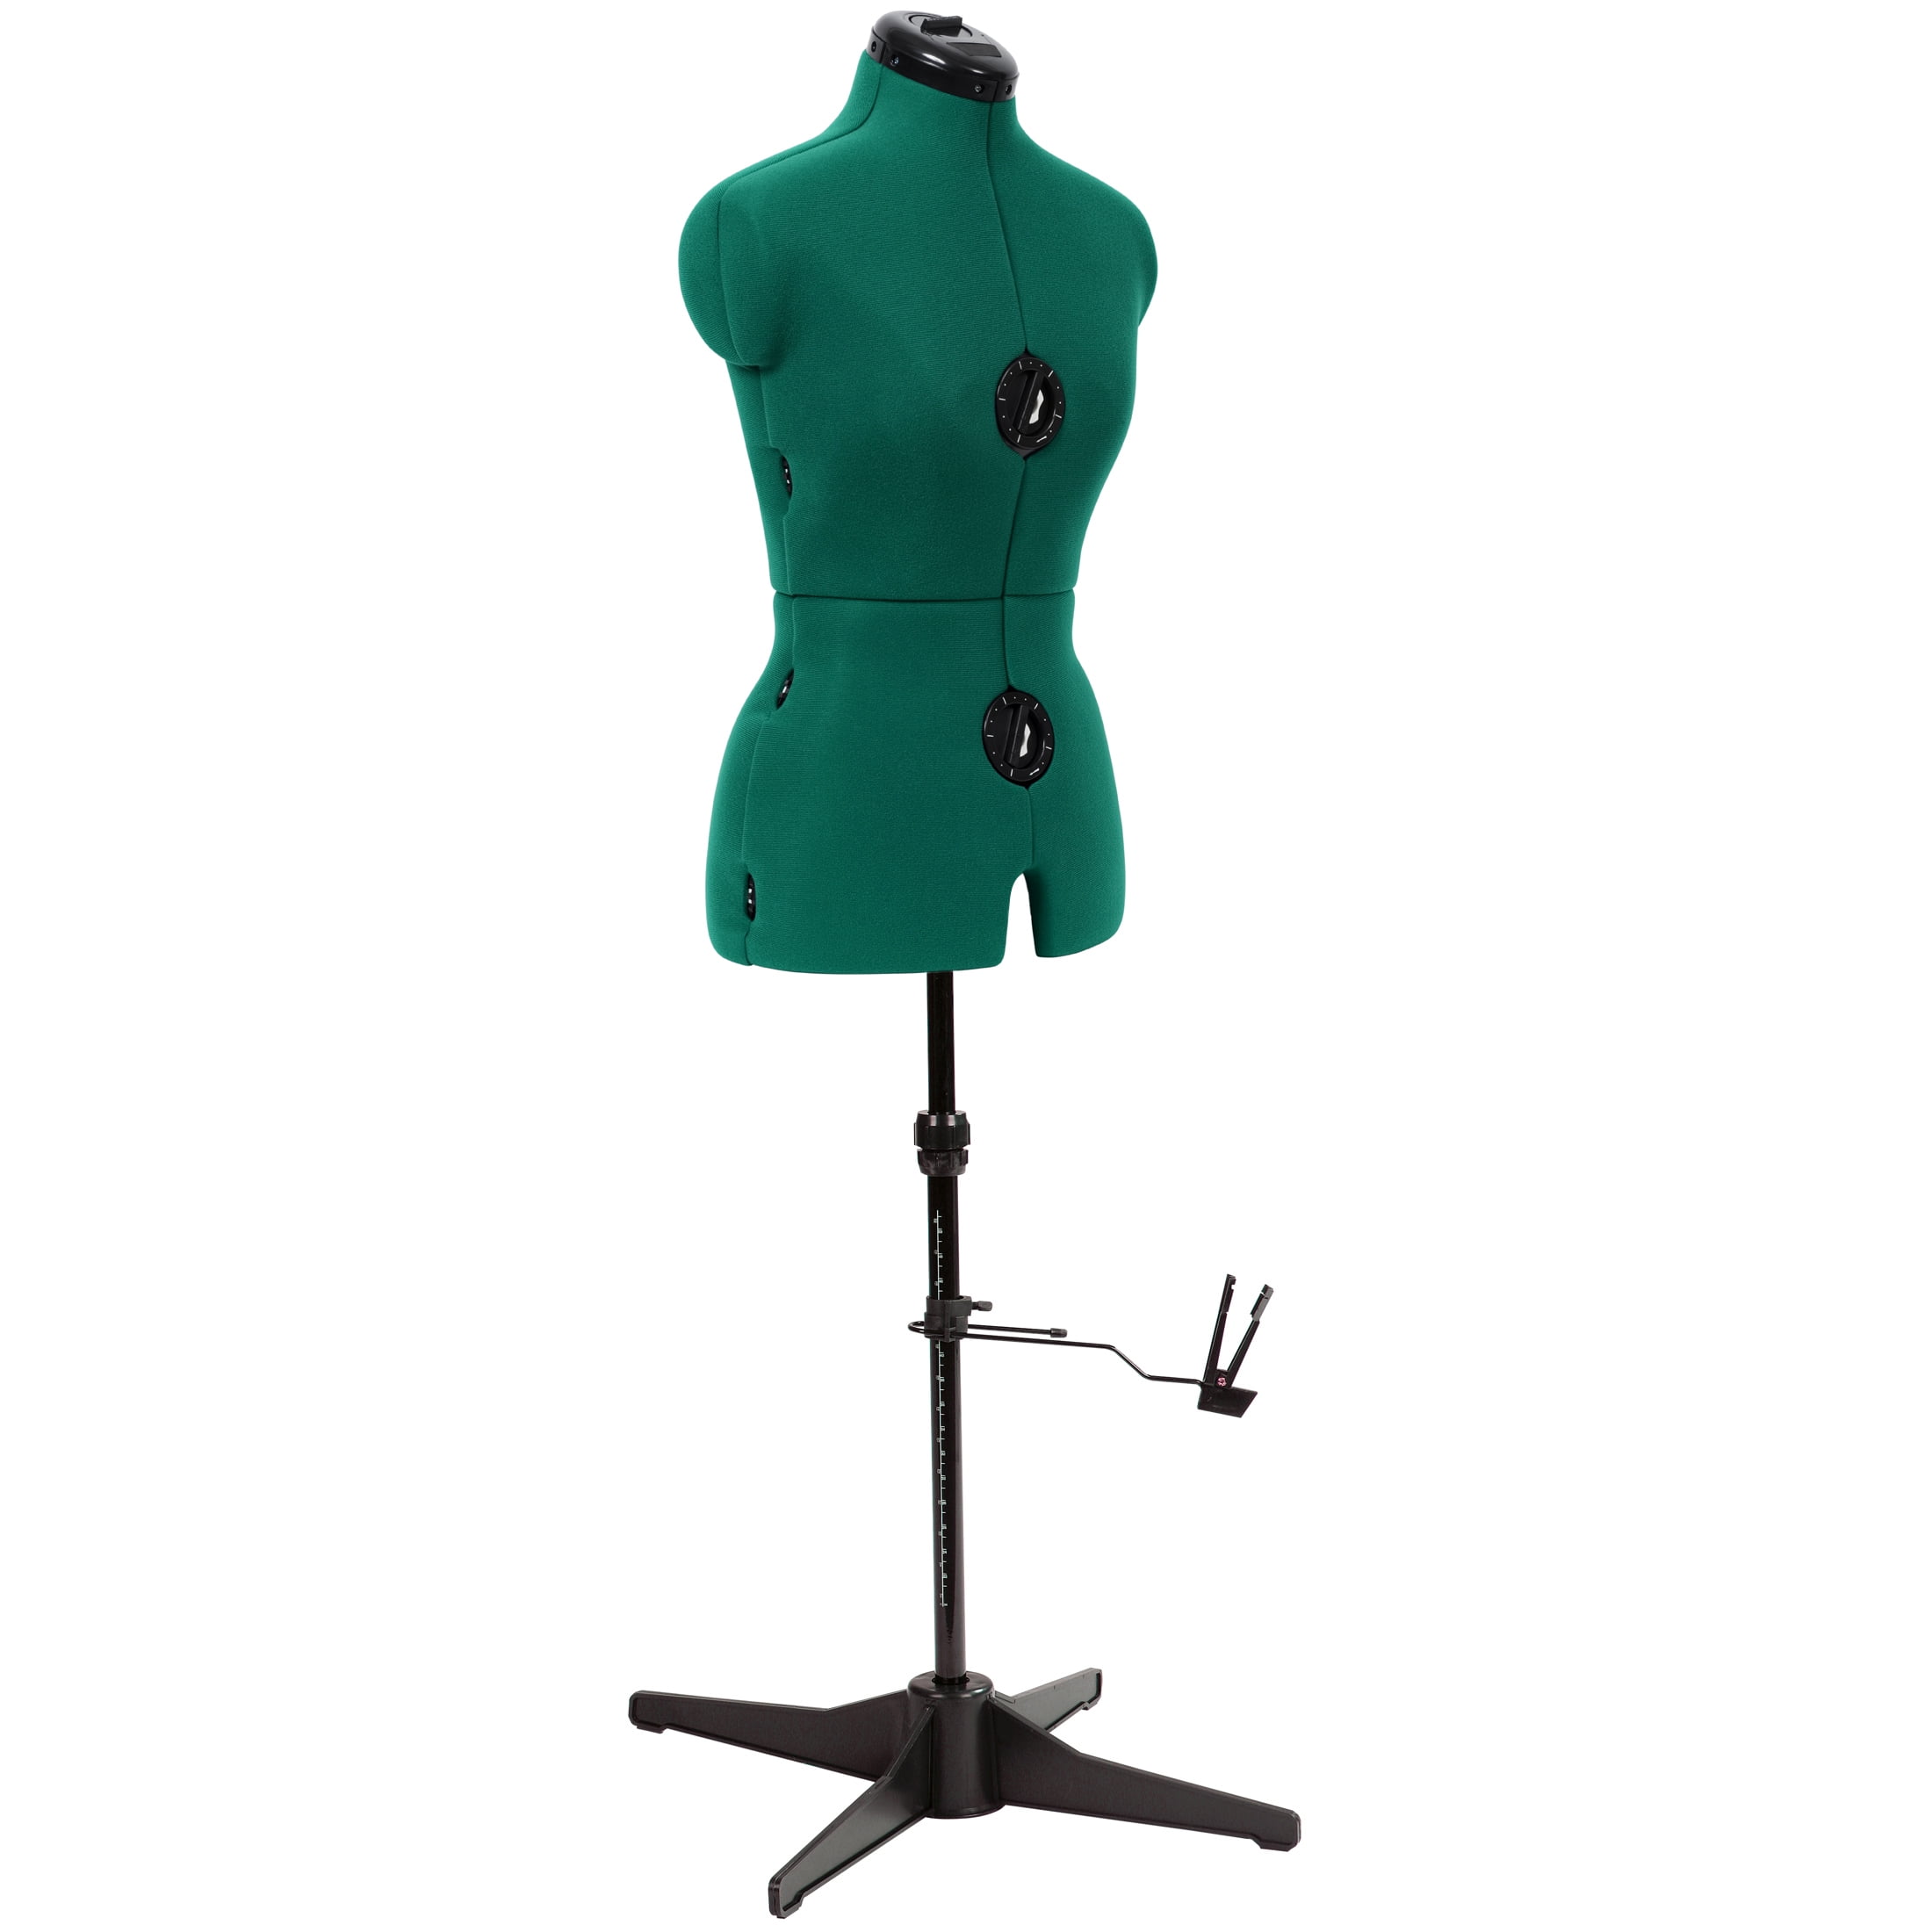 Dritz 20420 Sew You Adjustable Dress Form with Tripod Stand Small Opal Green for sale online 